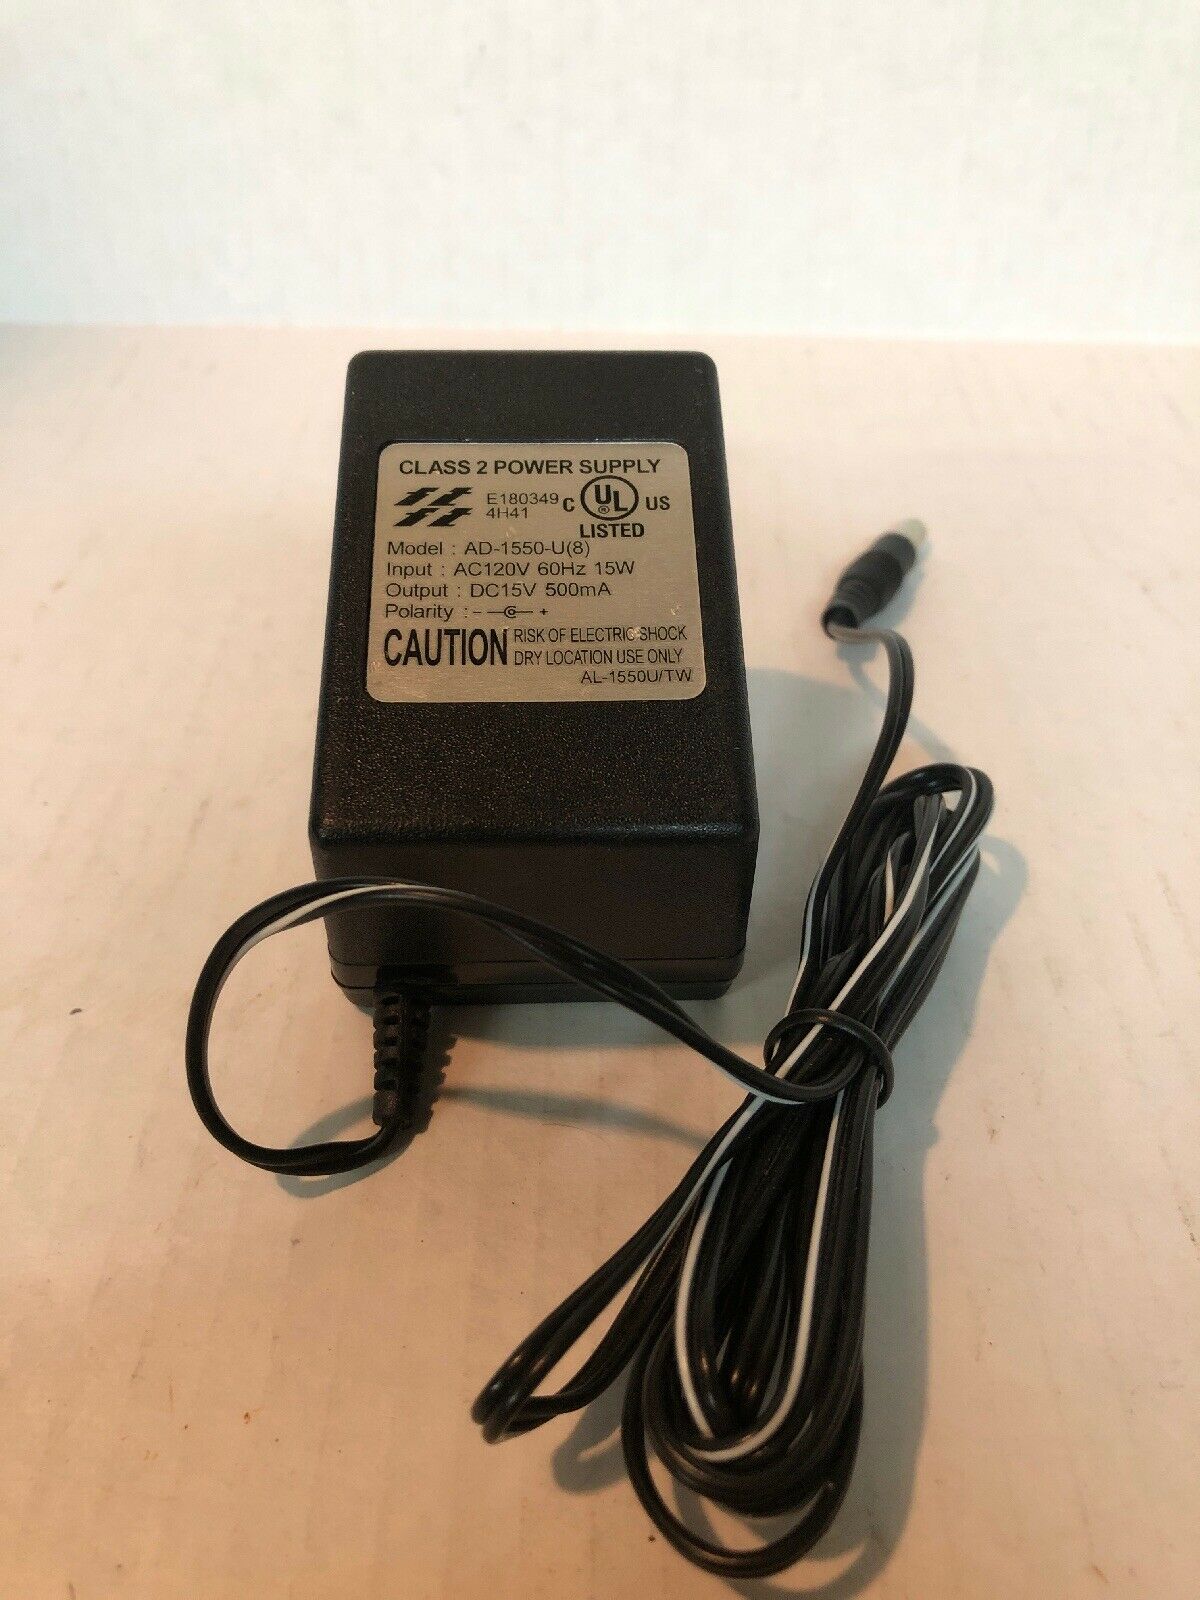 NEW AD-1550-U(8) 15V DC 500mA Class 2 Power Supply AC Adapter Charger Power Cord - Click Image to Close